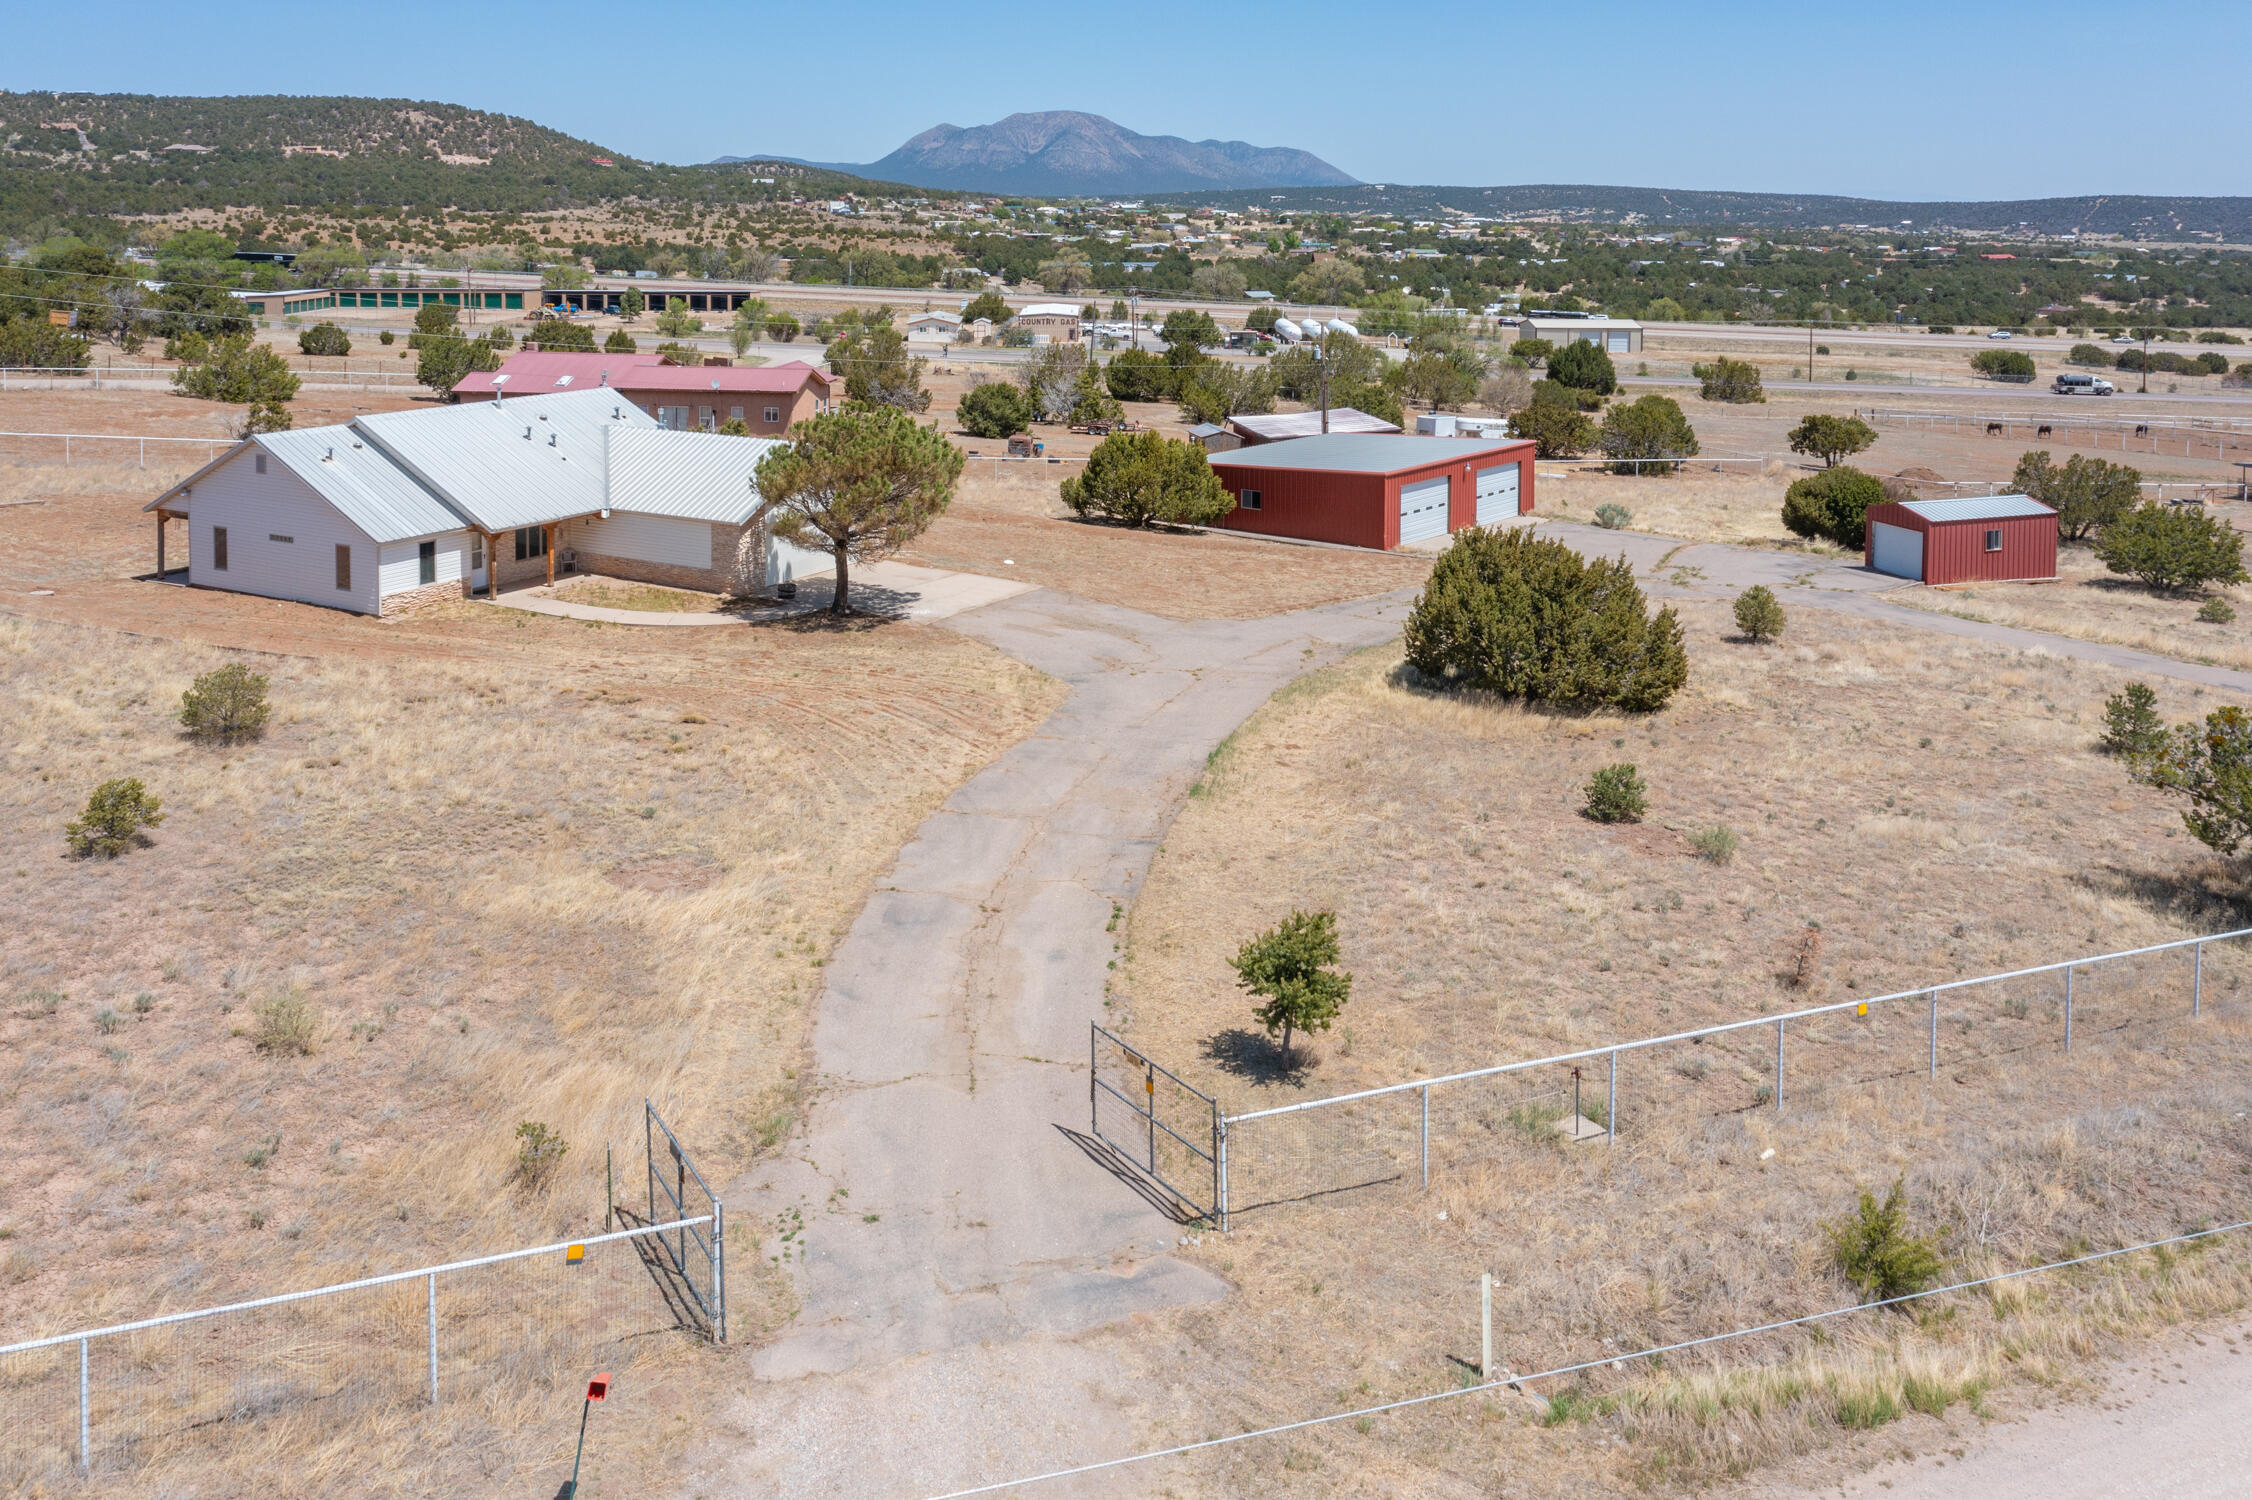 Just over 2 acres, this ranchette is completely fenced and ready for your animals or toys.  Just a 30 minute drive to downtown Albuquerque, This home offers lots of space and mountain views.  Besides the 25 x 27 attached 2 car garage, property has an approximately 38 x 40 ft out building with electricity that will garage 4 more cars/tractors  or make a great barn or workshop.   Plus has an additional 10 x 20 storage building.. Home has upgraded wood windows and accents in the living area.  Metal roof and Wrap around porch helps keep you cool in summer.  Vented for wood burning stove in Family room. New W/H Home is on the Entronosa water system and the Septic inspection done .  Besides fresh paint and new floor covering this place  is a real beauty and will make a special one to call home!